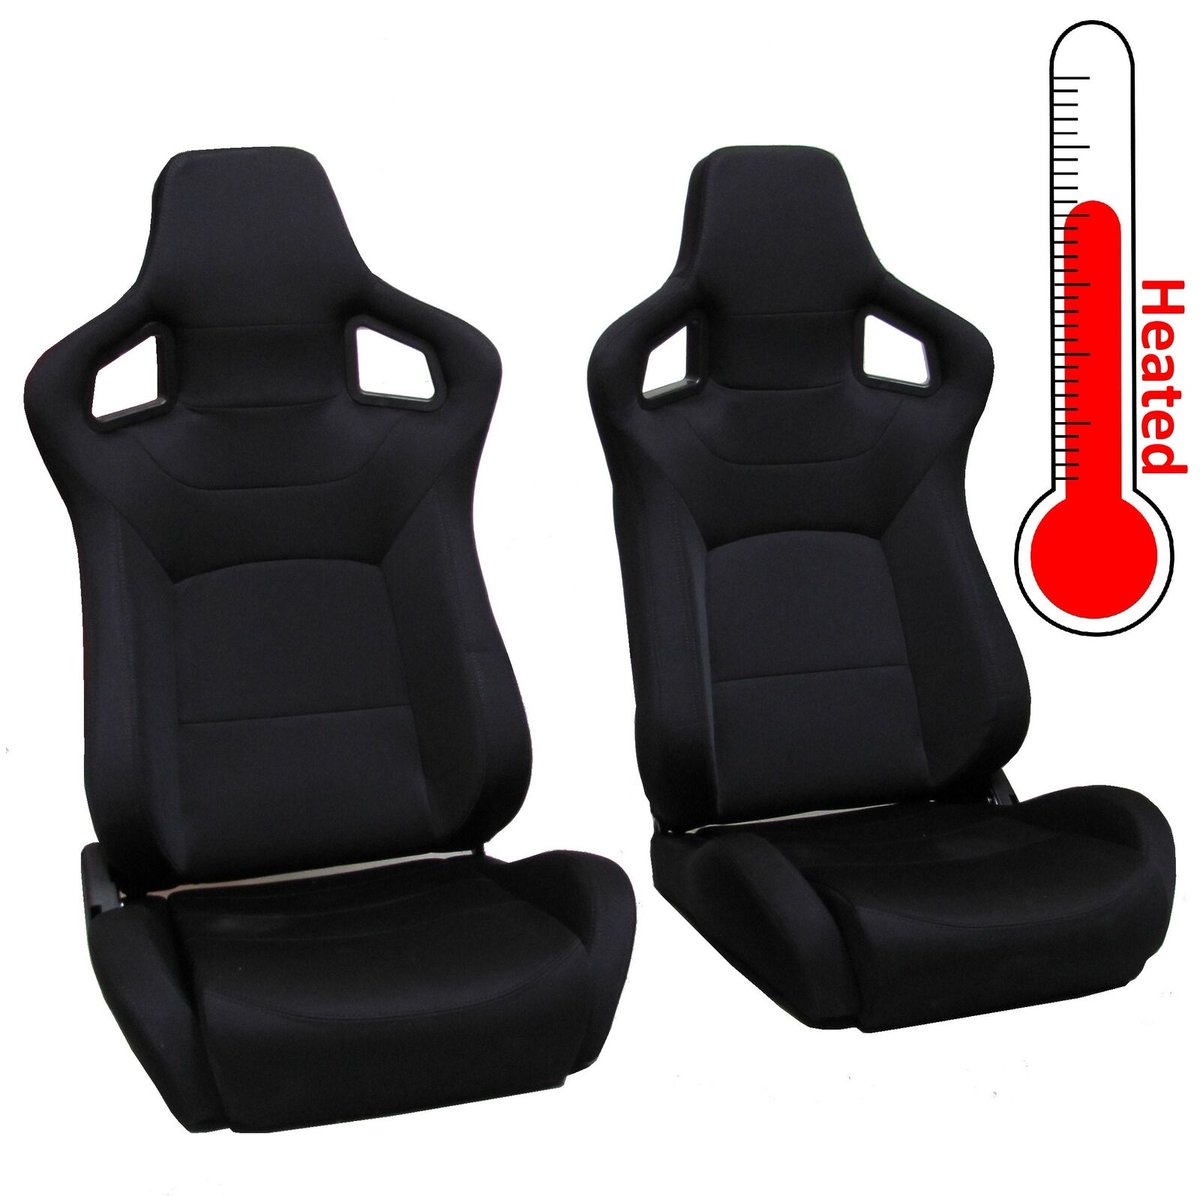 Ad - Heated Front Seats for Land Rover Defender 
On eBay here -->> ow.ly/r8H650PHFxG

 #LandRoverDefender #HeatedSeats #AutoParts #OffRoad #VehicleAccessories #WinterComfort